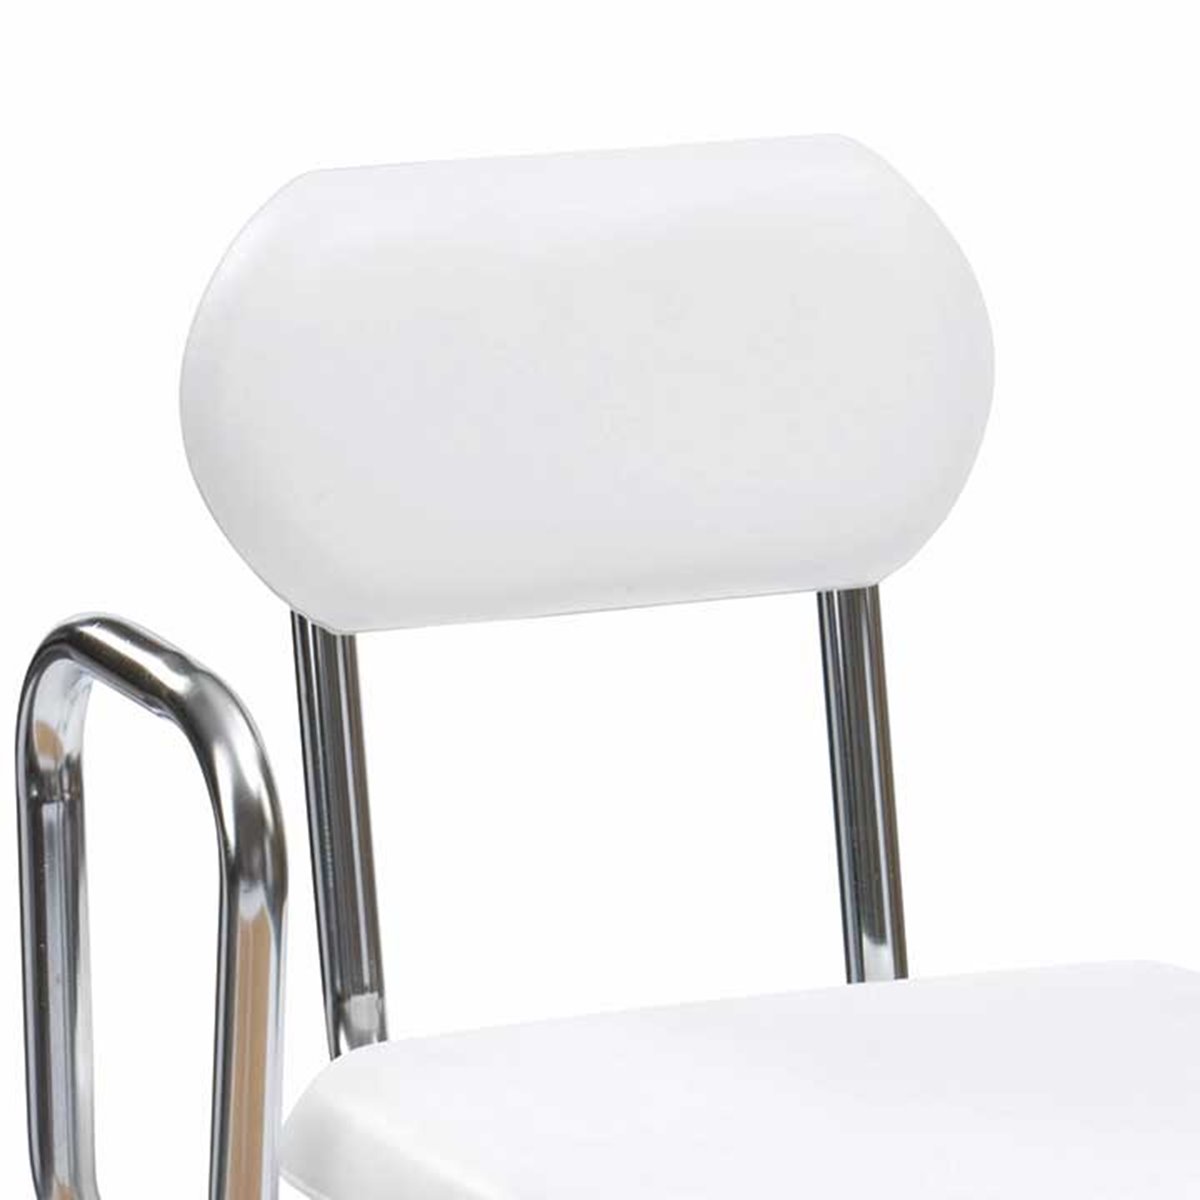 Drive Medical All-Purpose Kitchen Stool